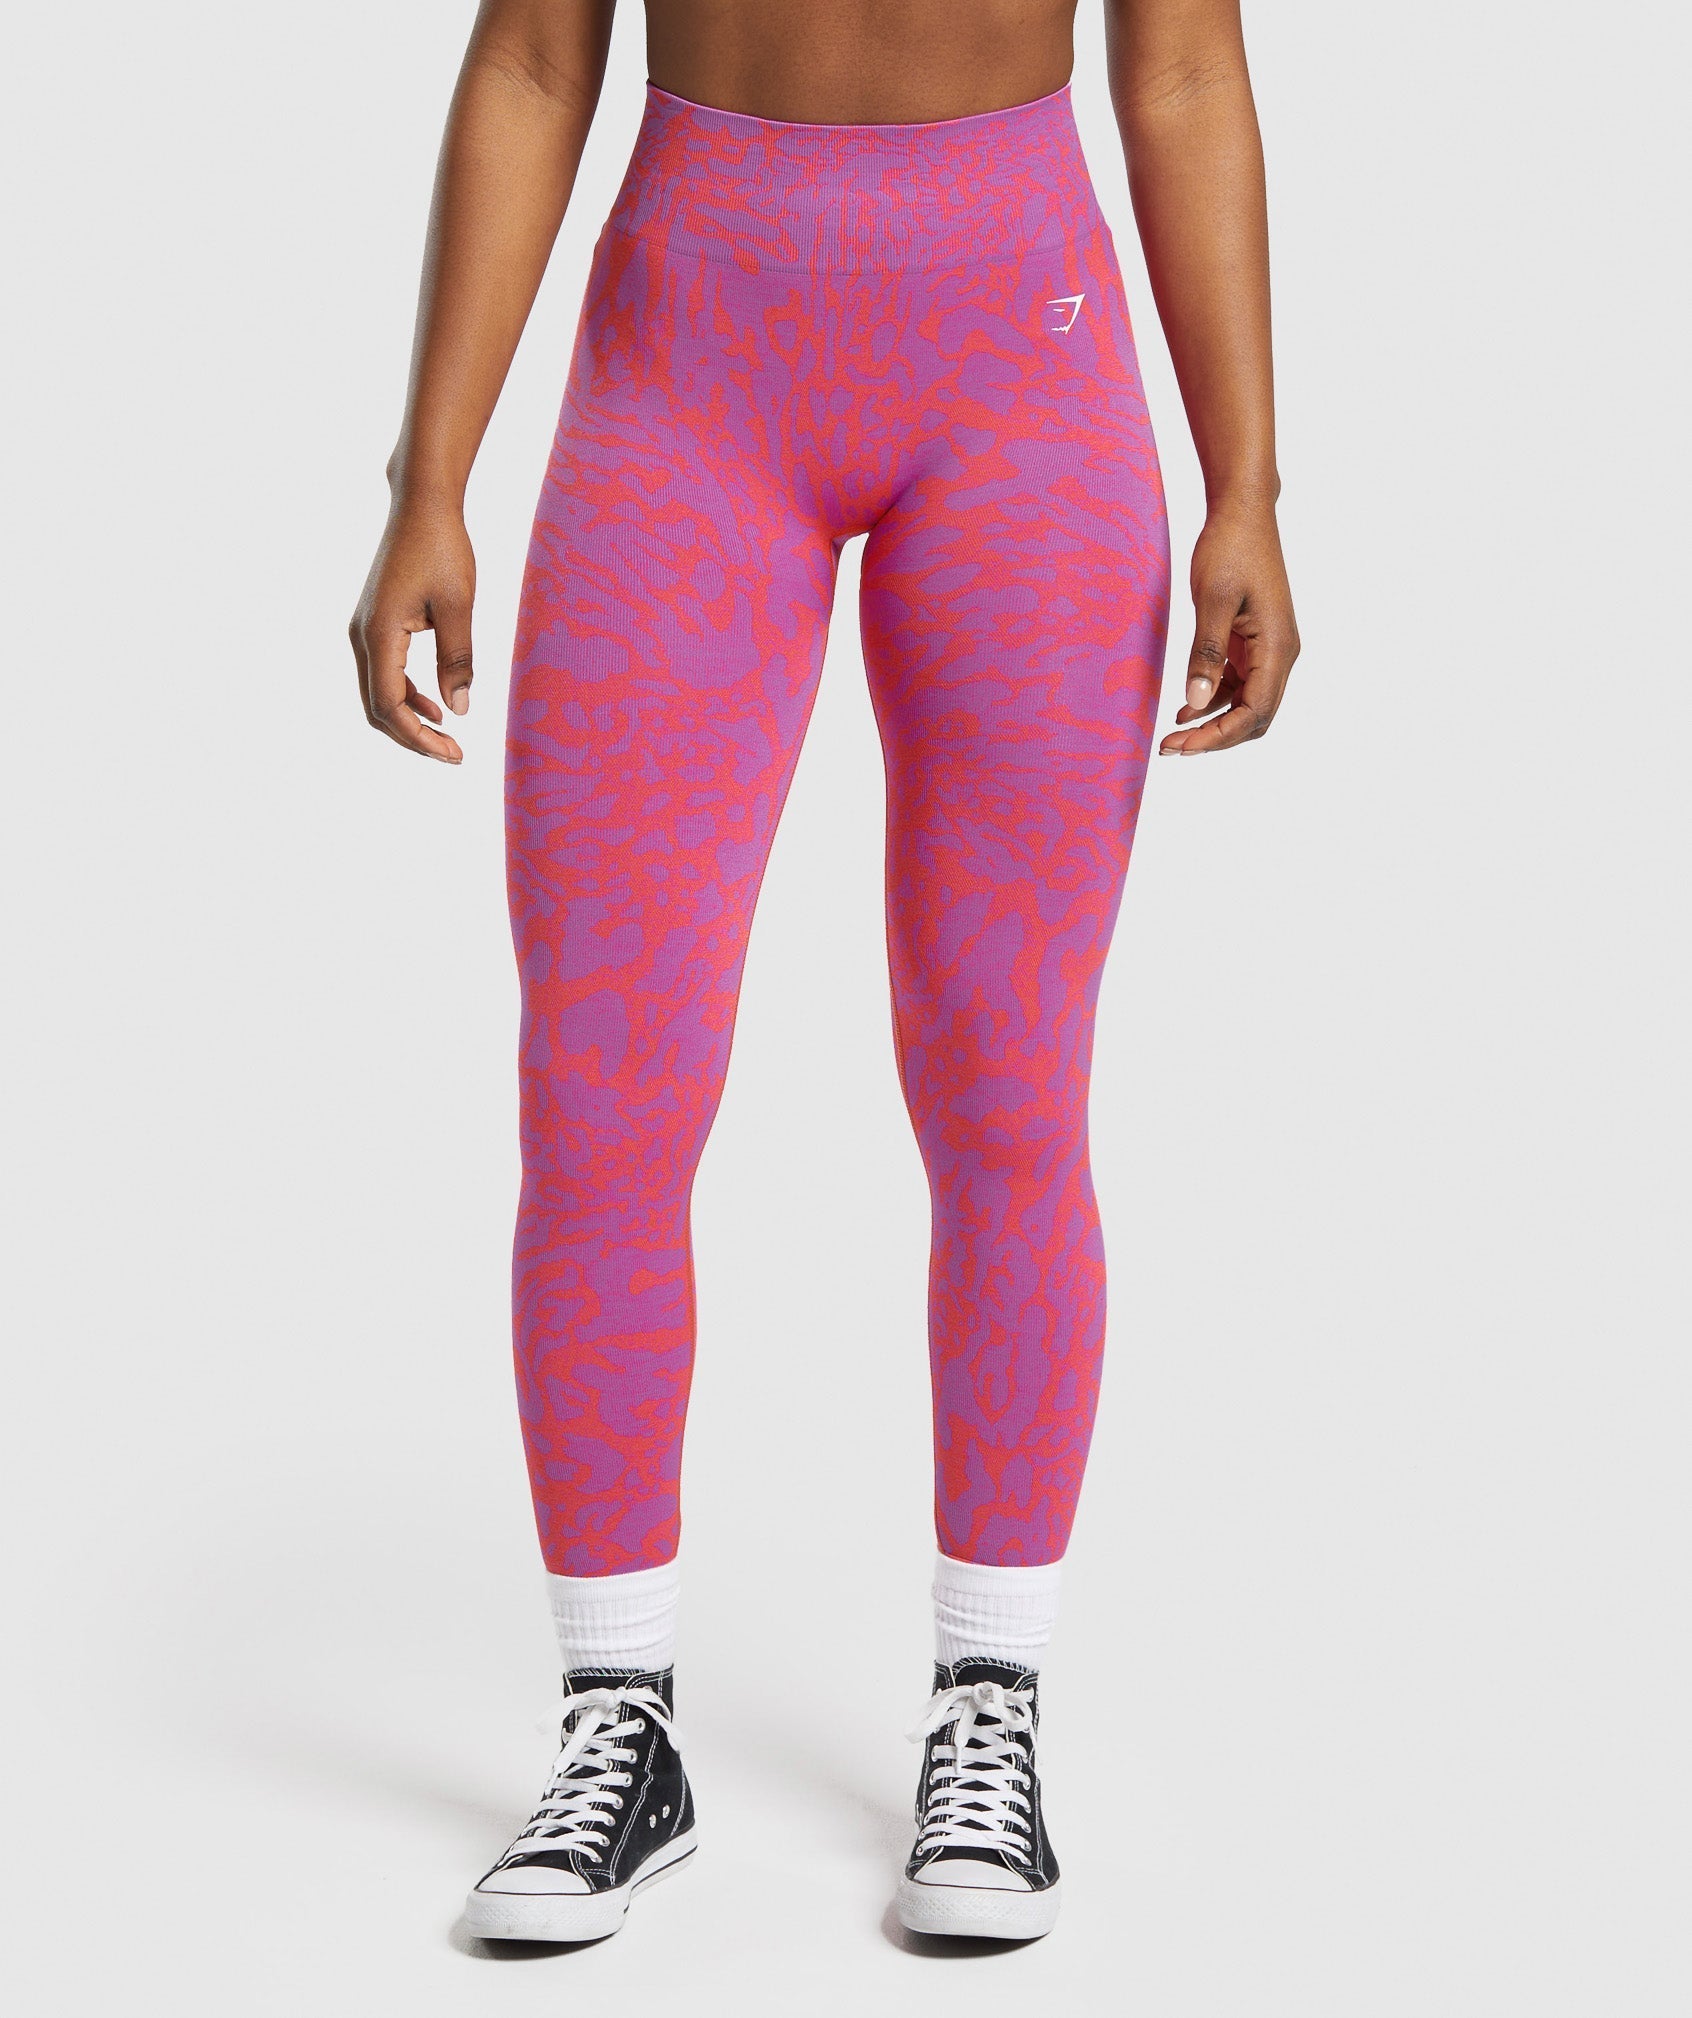 Adapt Safari Seamless Legging in Shelly Pink/Fly Coral